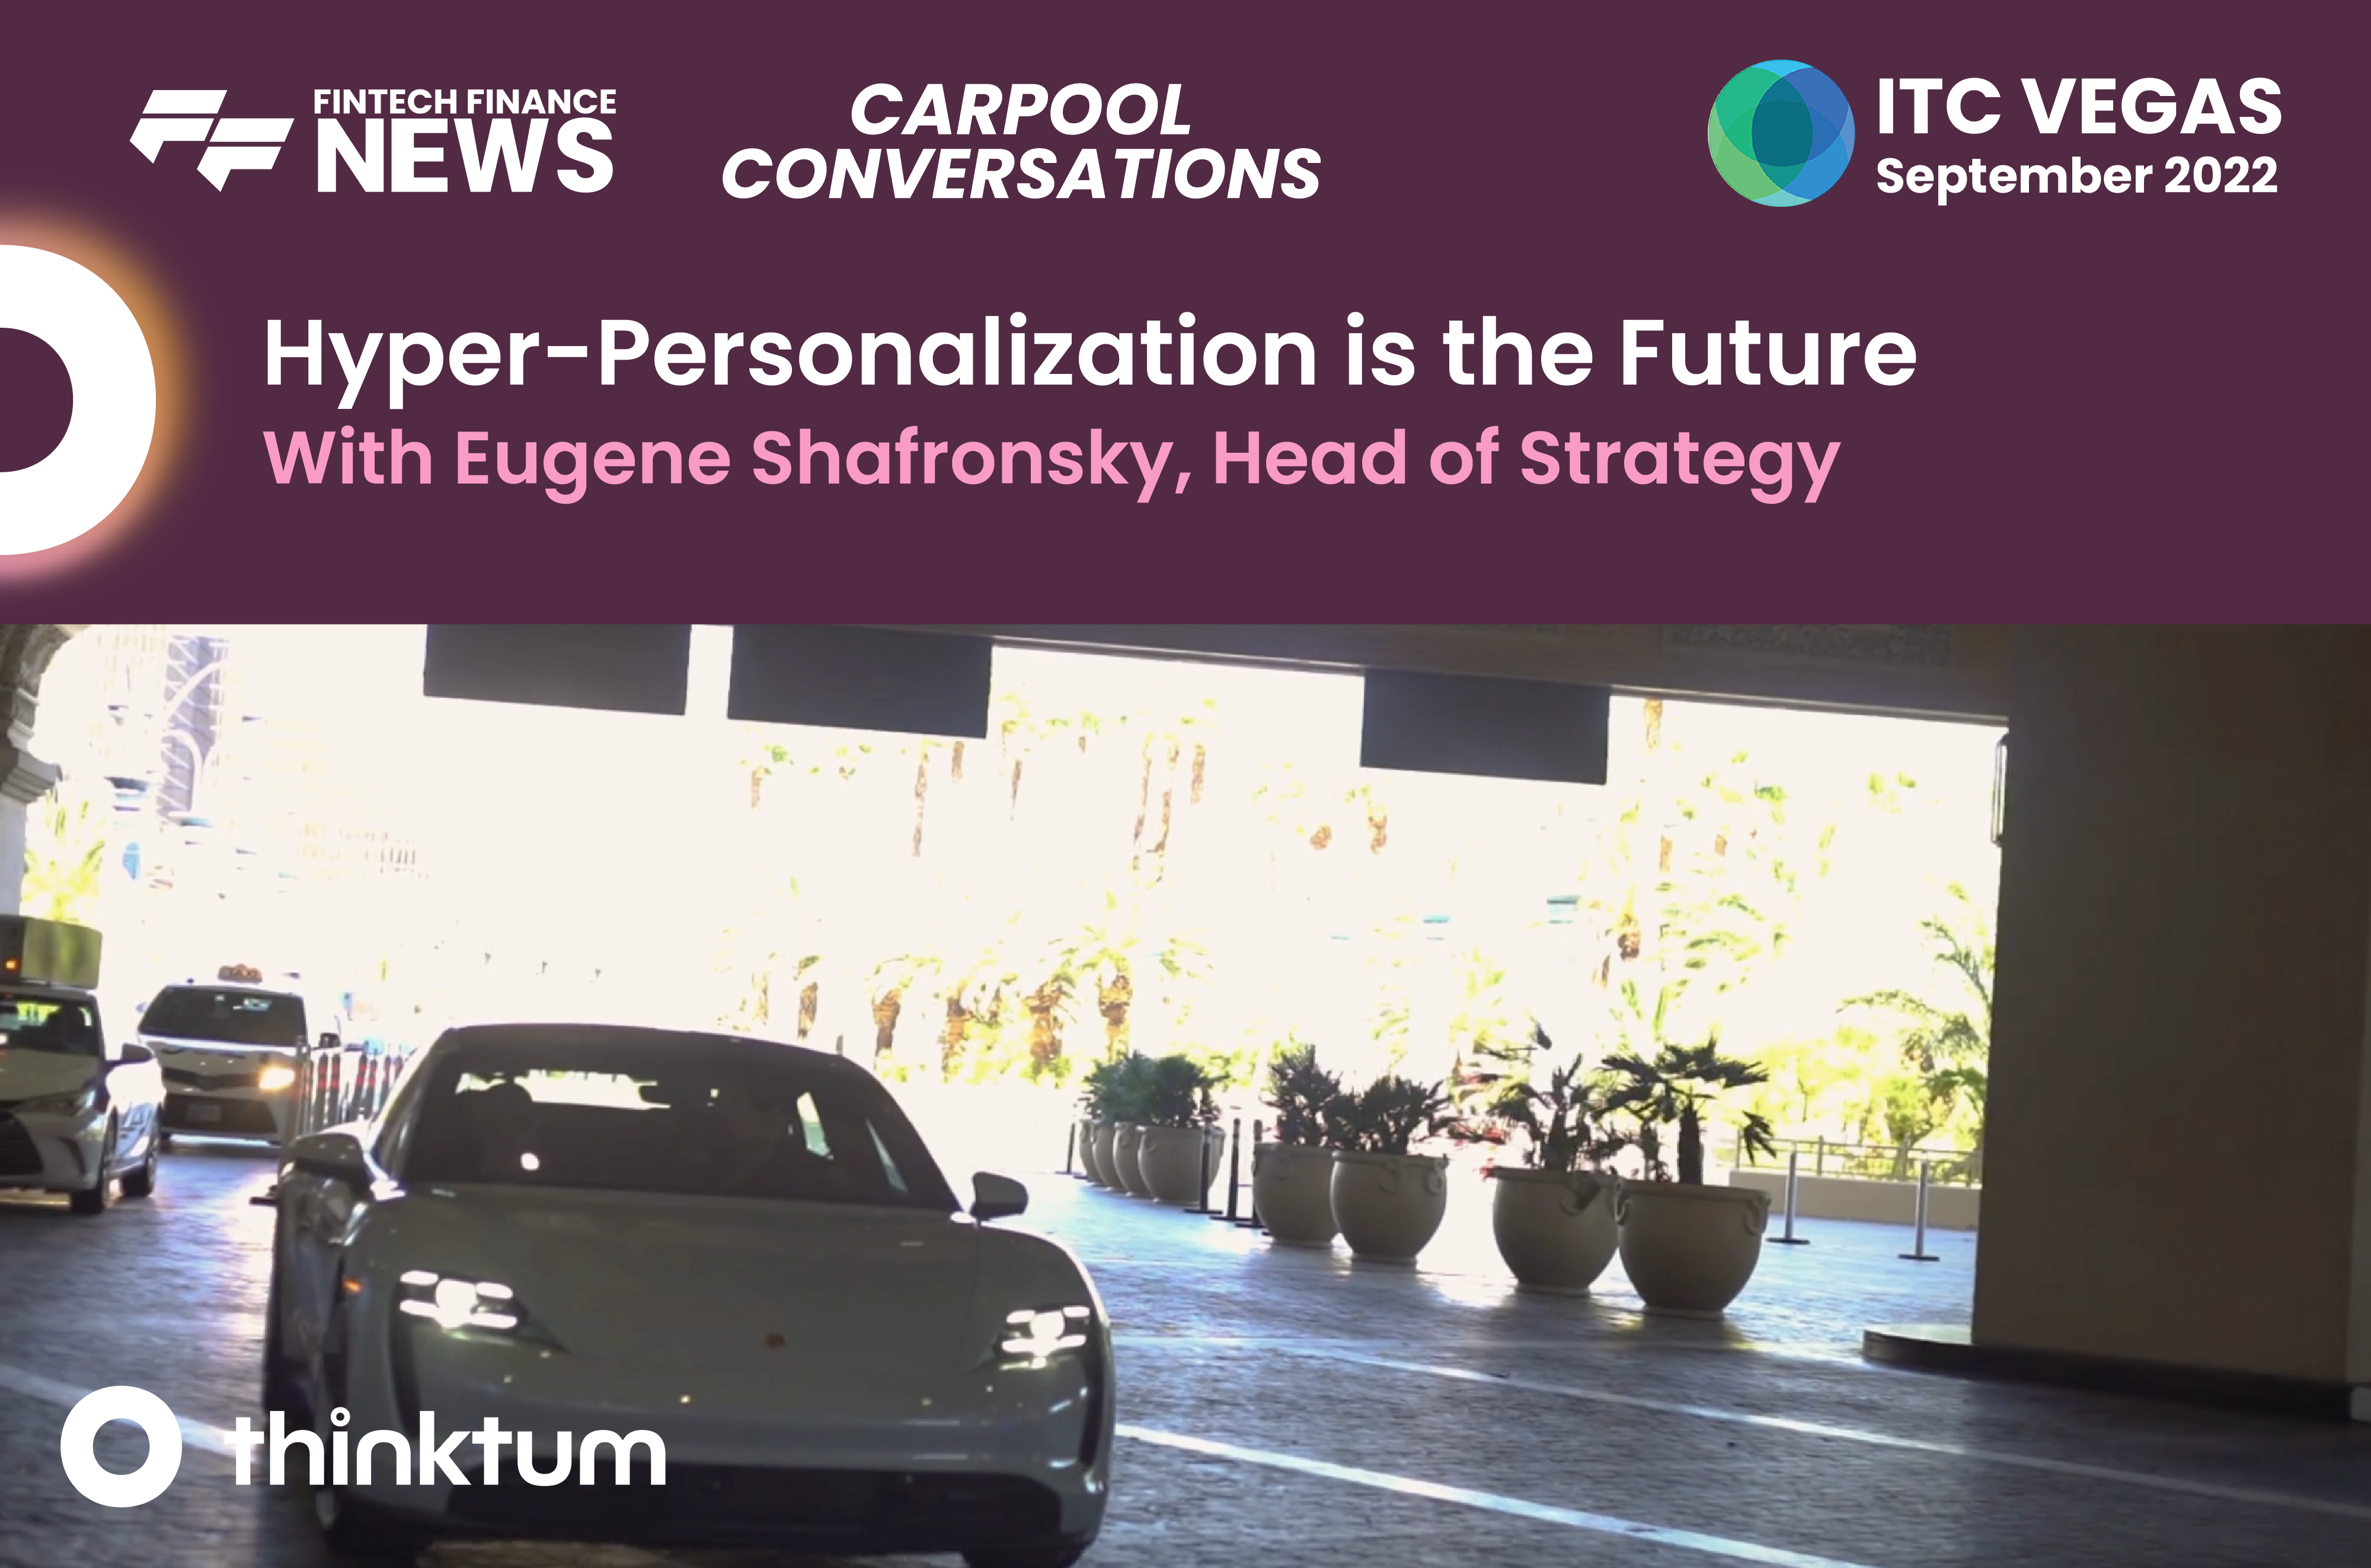 Ad for a carpool conversation interview with Eugene Shafronsky, Head of Strategy and the title Hyper-Personalization is the Future along with ITC, thinktum and FF News logos.